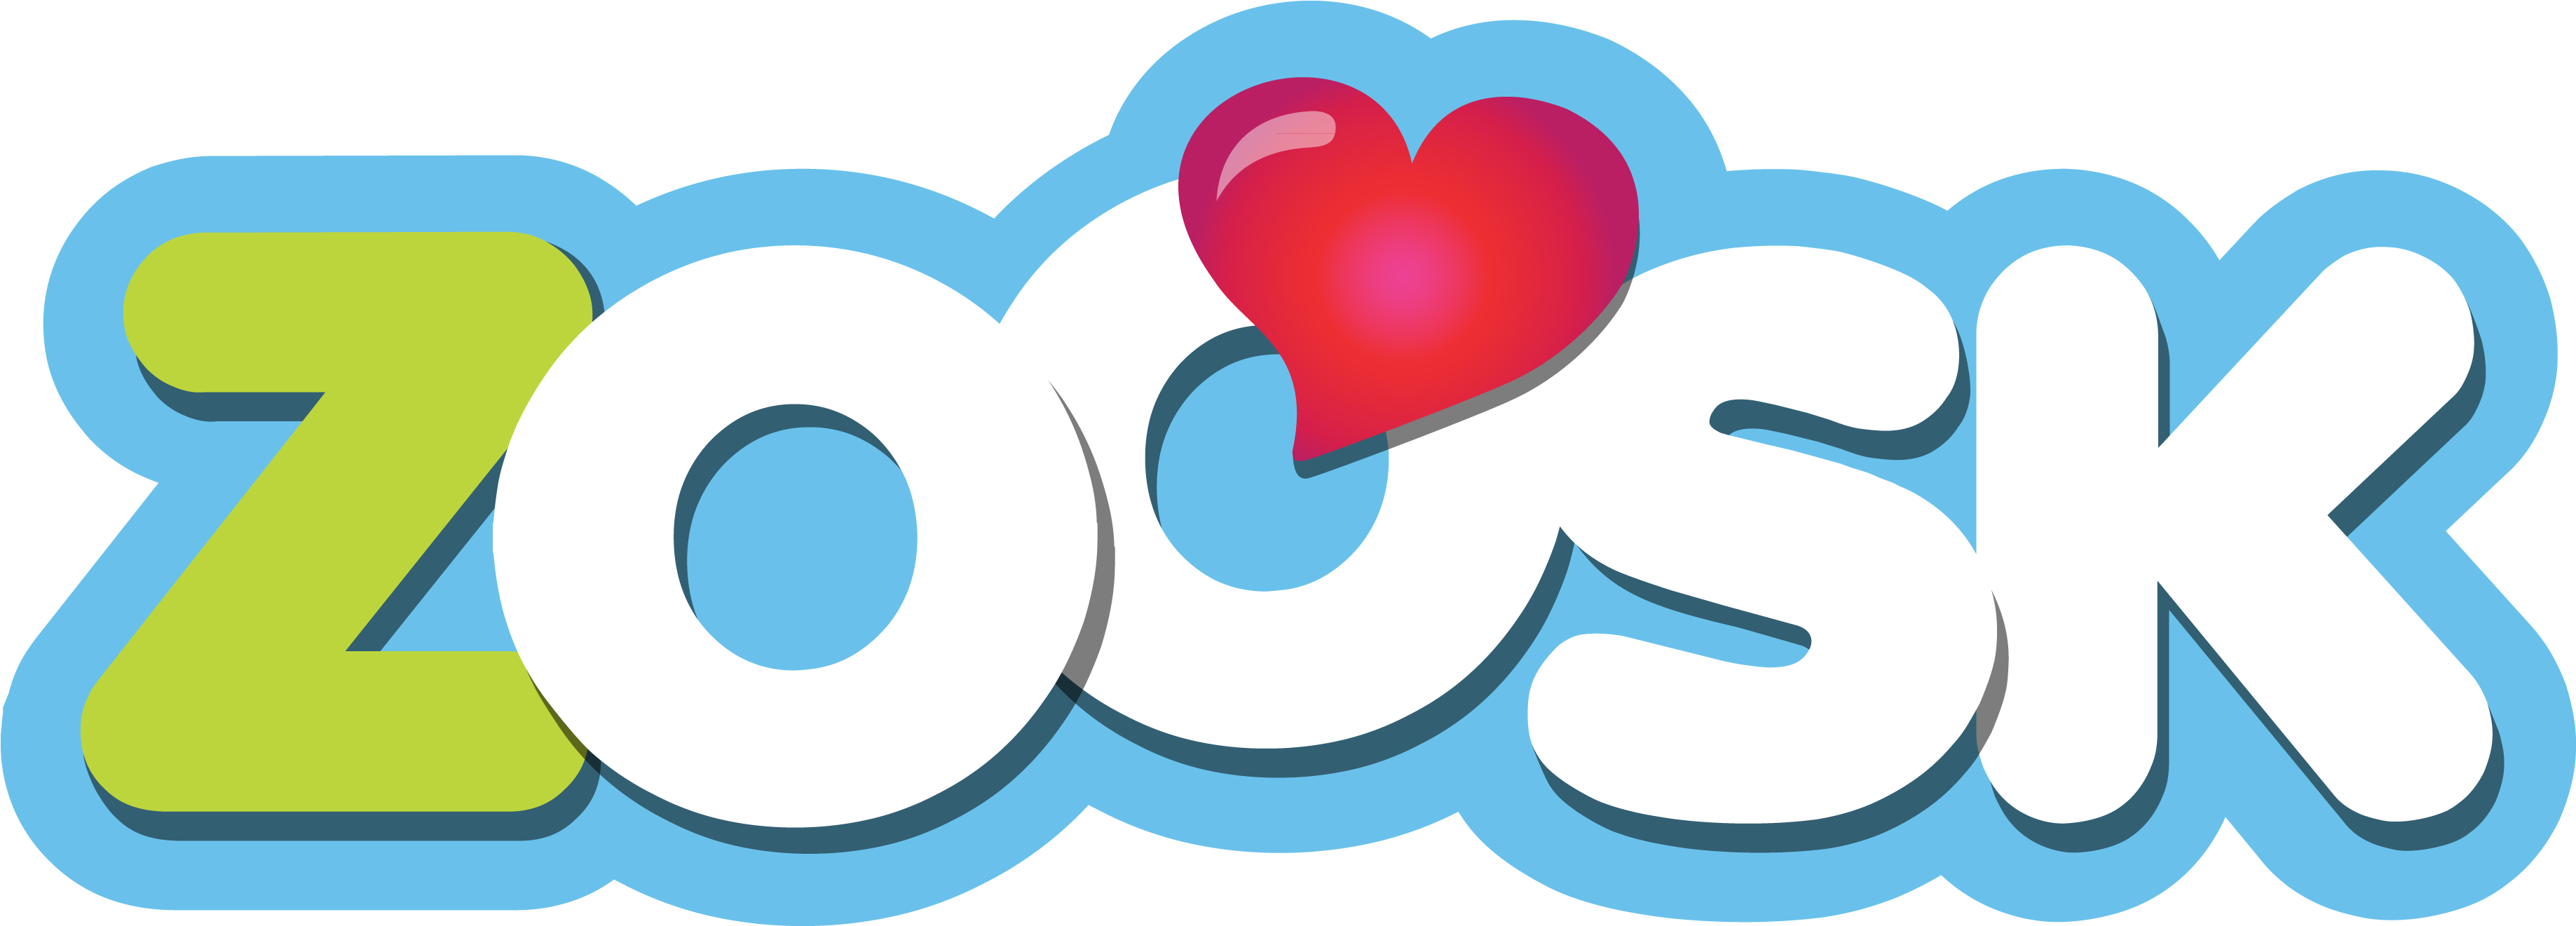 Download Zoosk - Online Dating Apps Logos PNG Image with No Background -  PNGkey.com